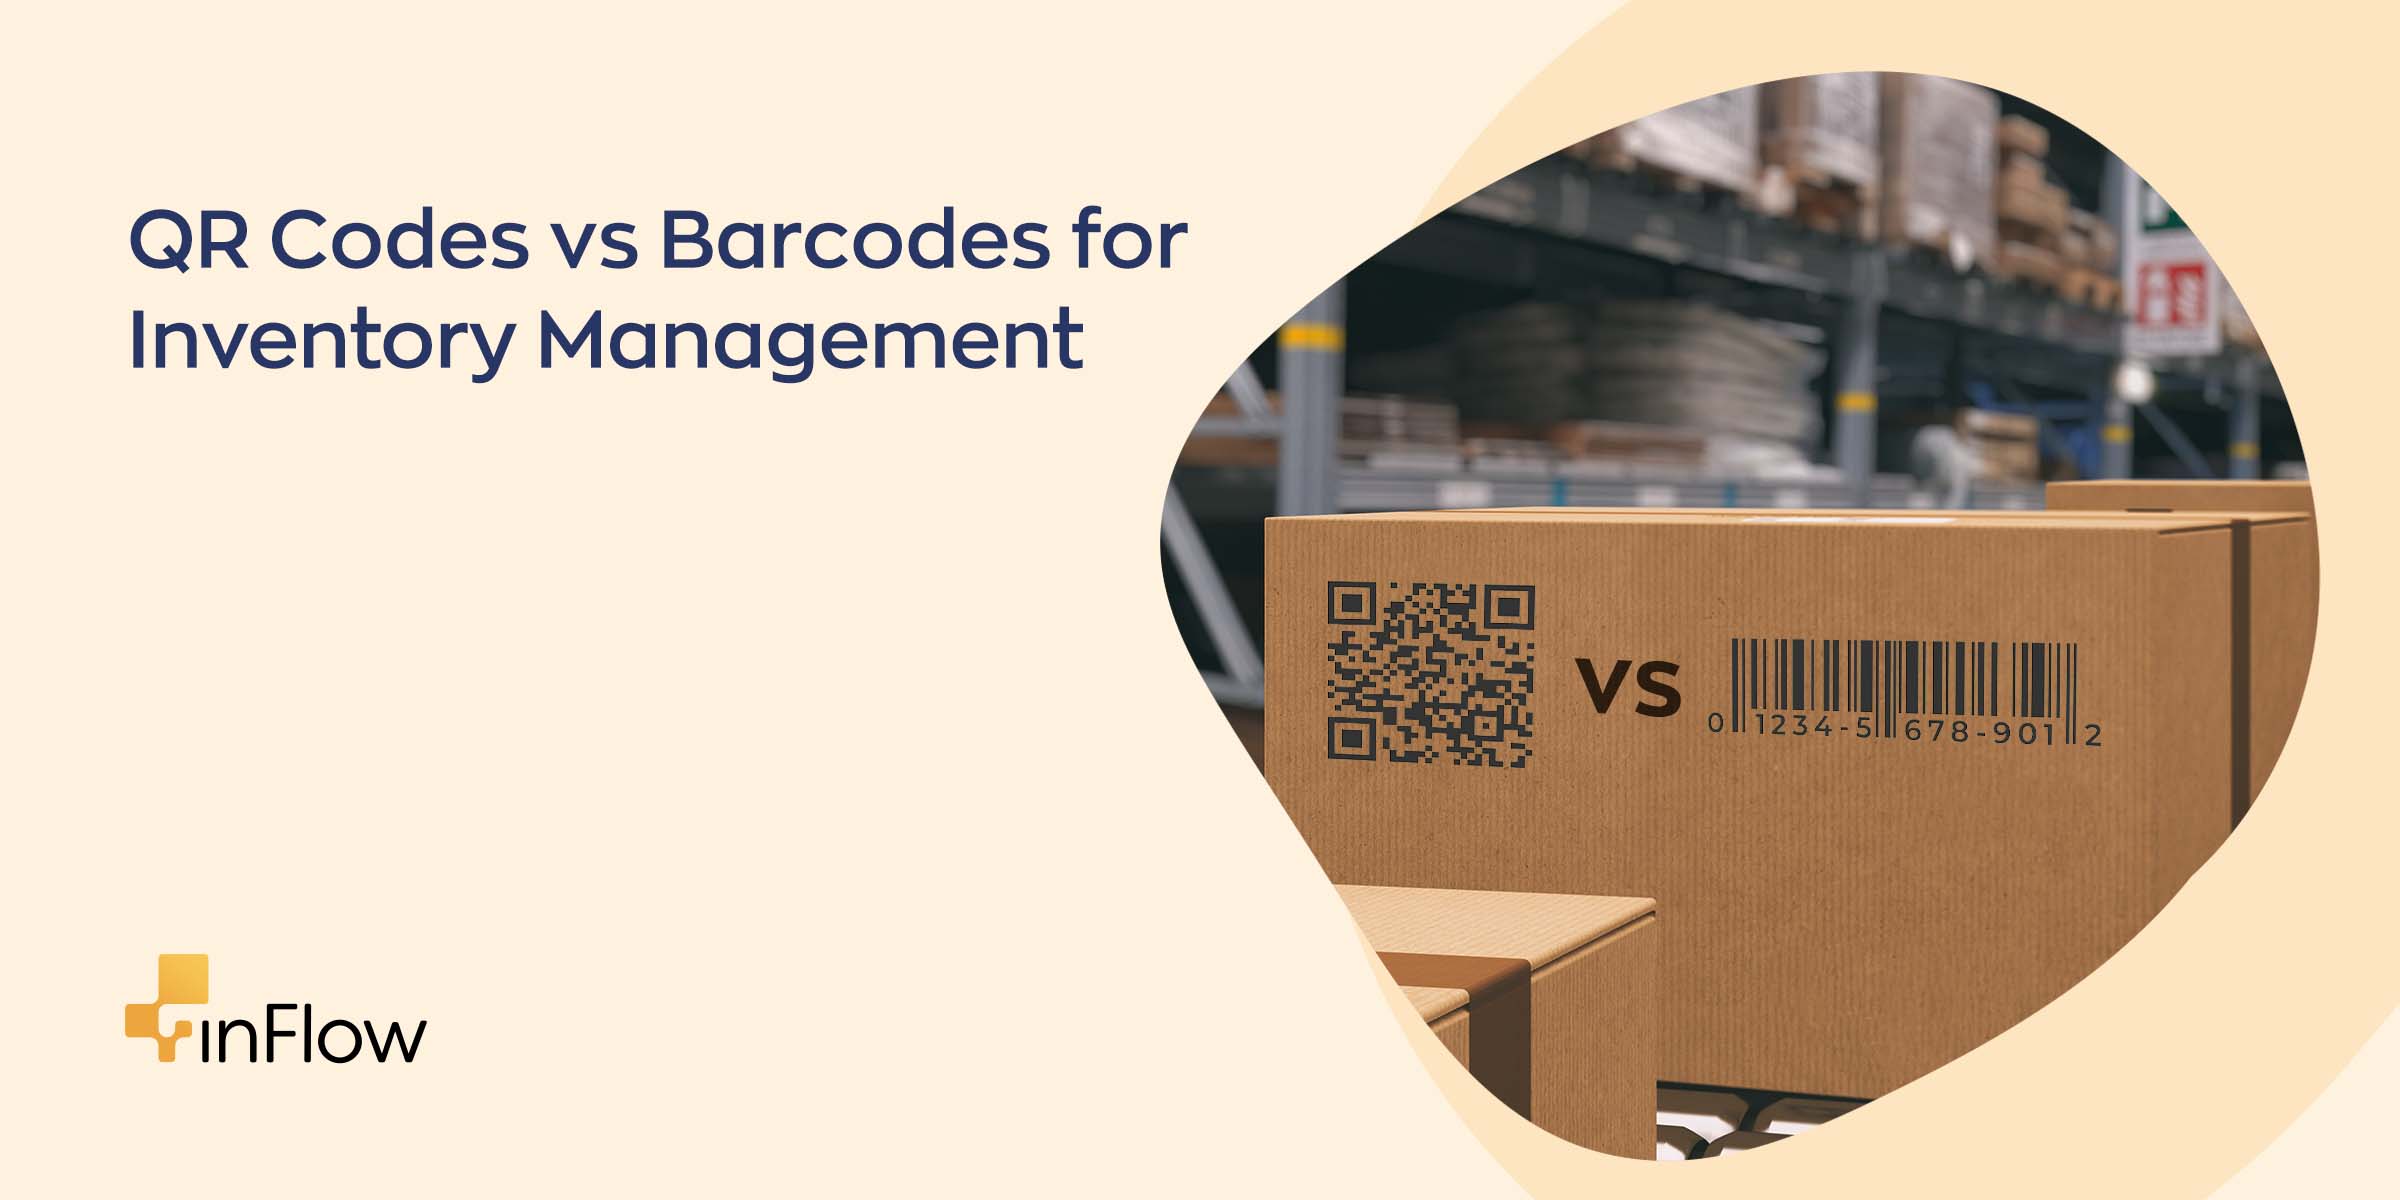 QR codes vs Barcodes for Inventory Management